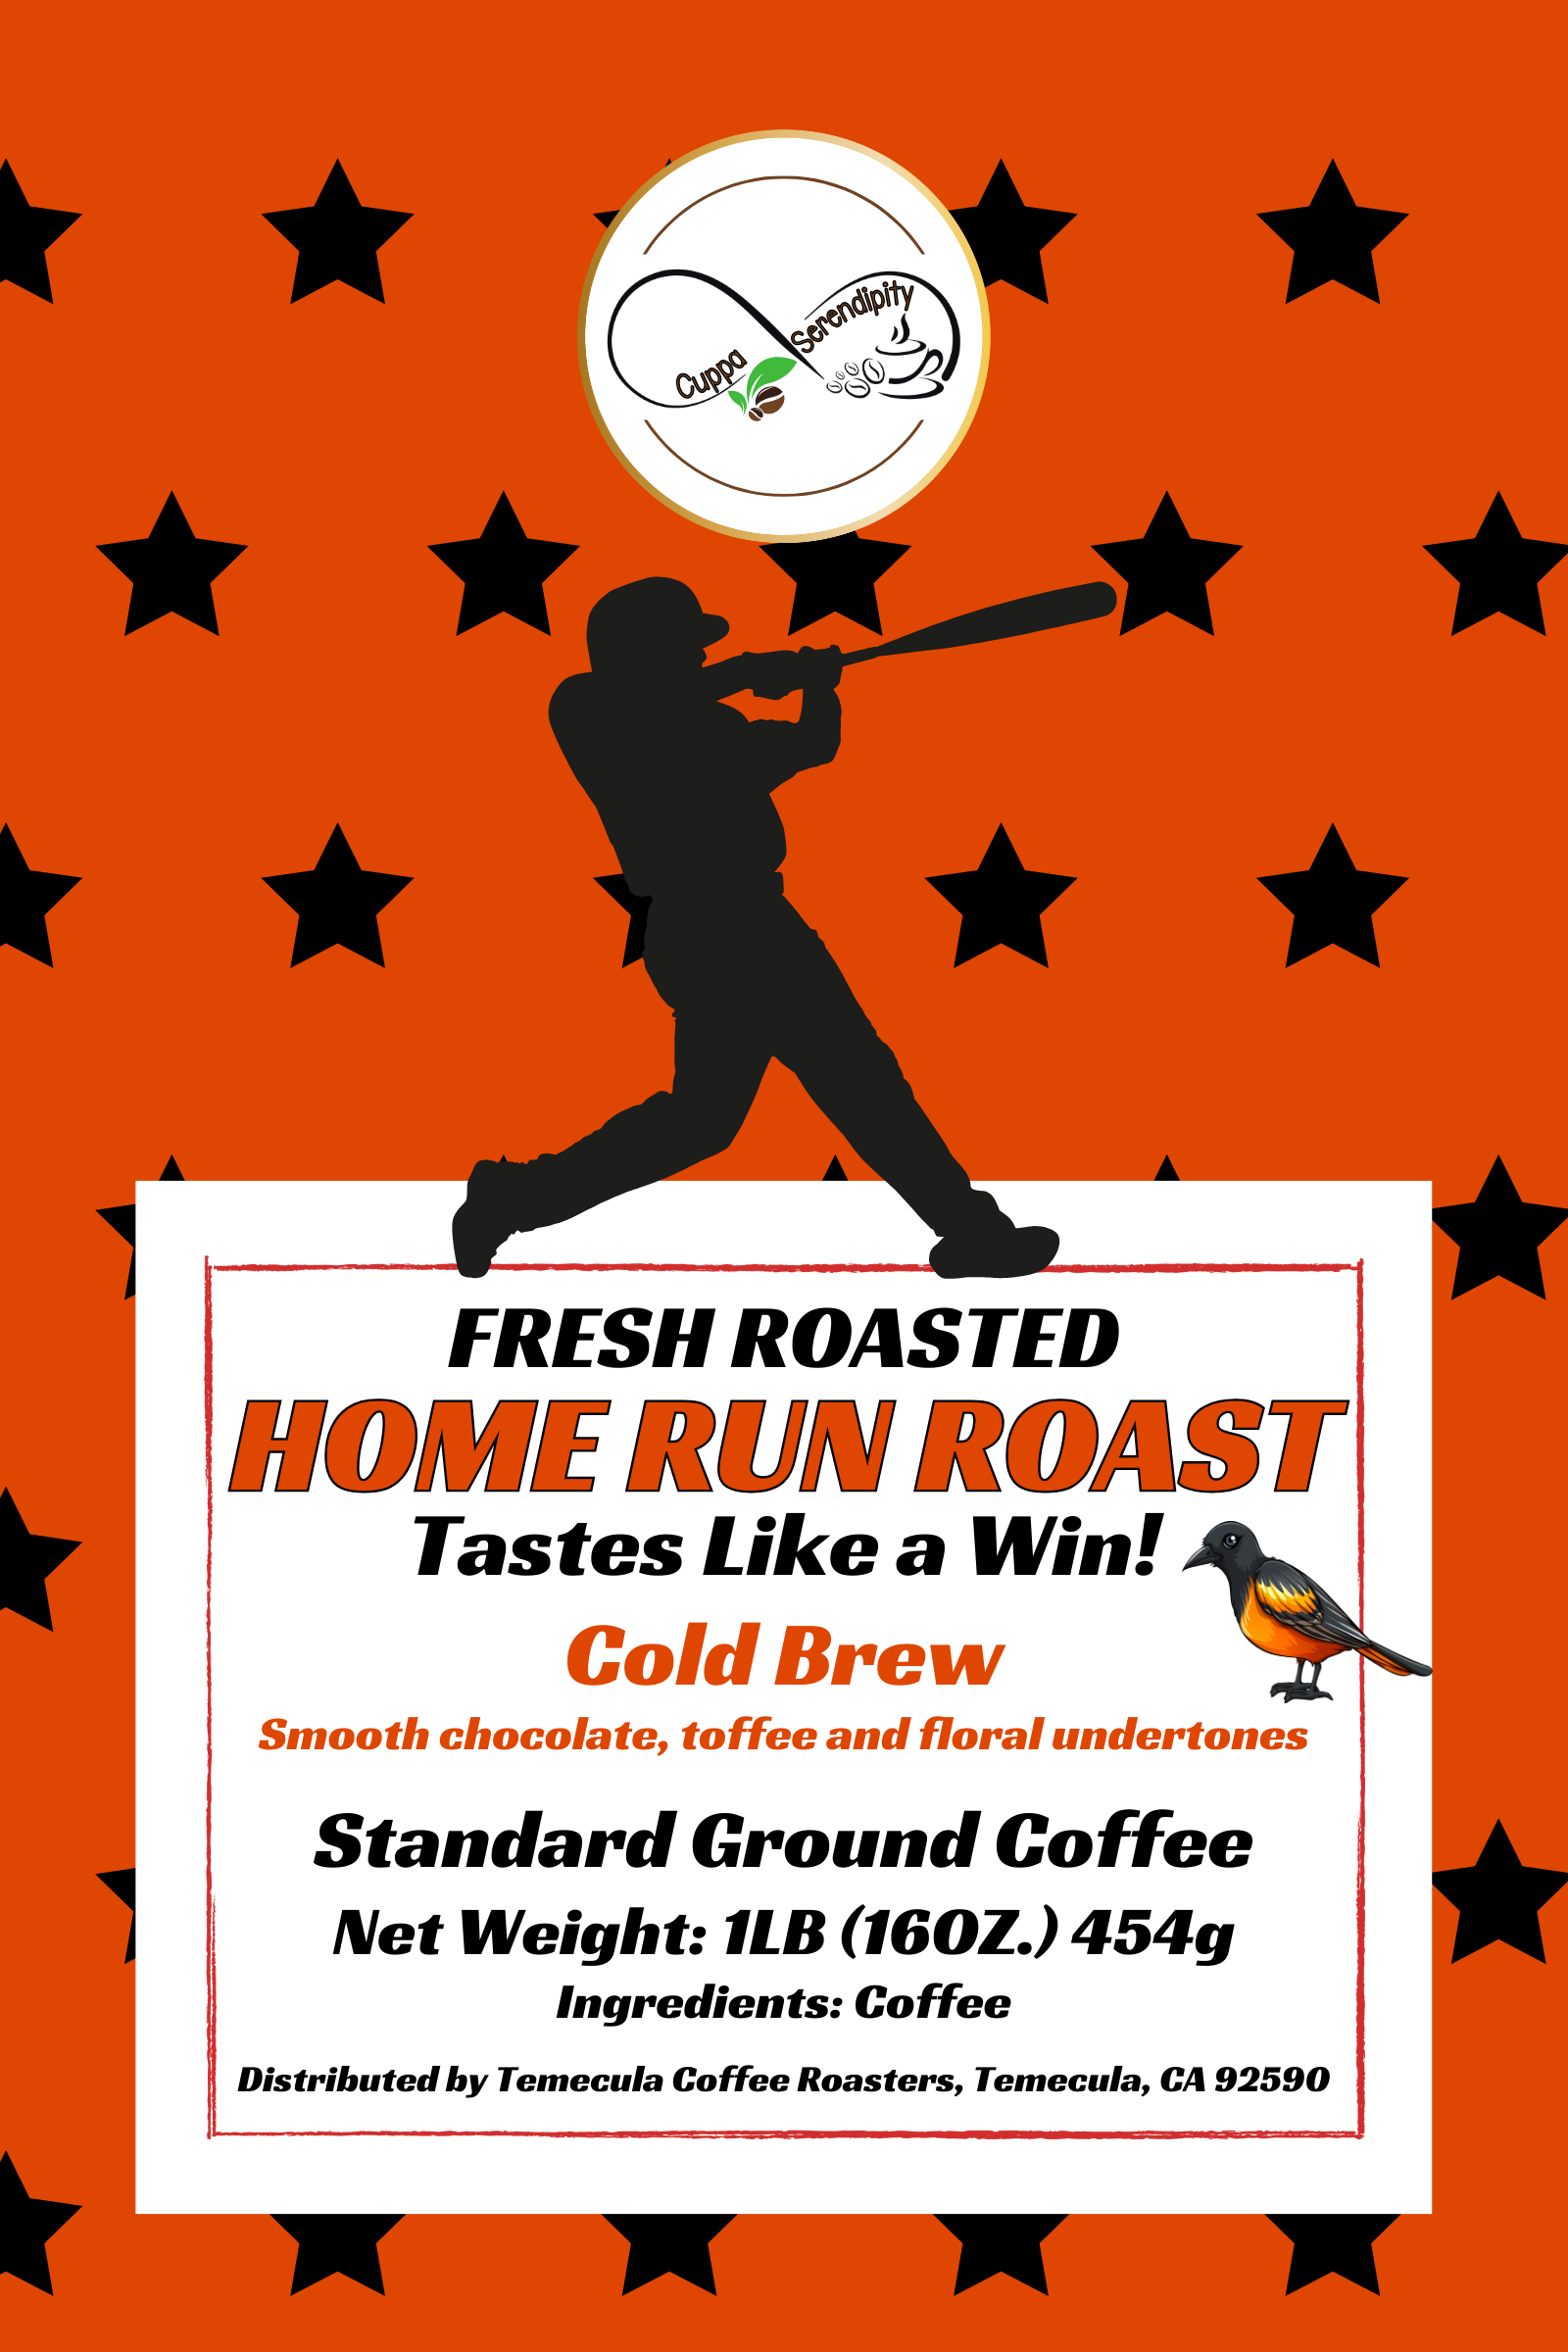 Home Run Roast Cold Brew Coffee for Baltimore Baseball Fans